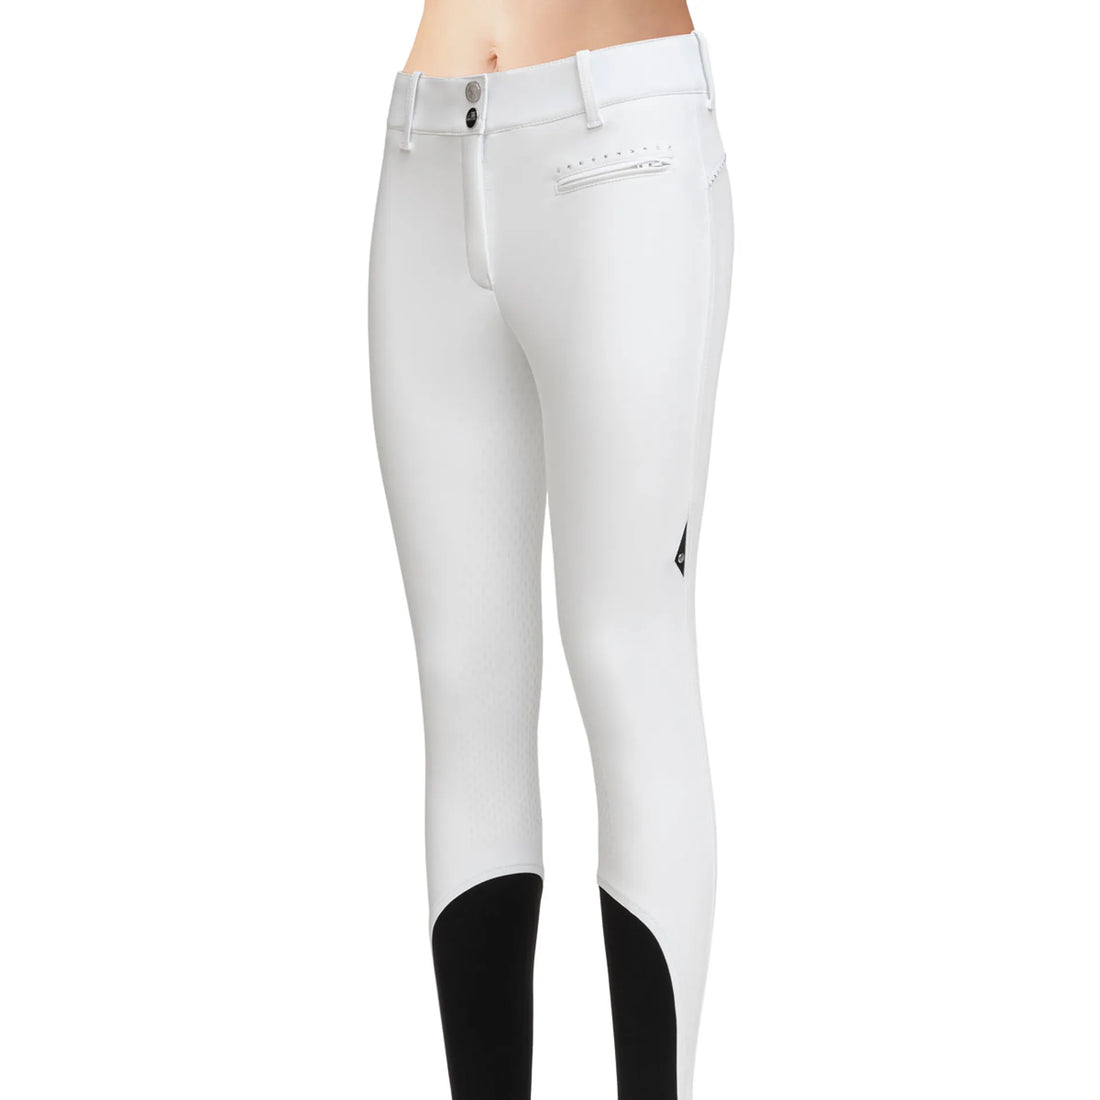 Equiline Cecilefh White Crystal Full Grip Breeches